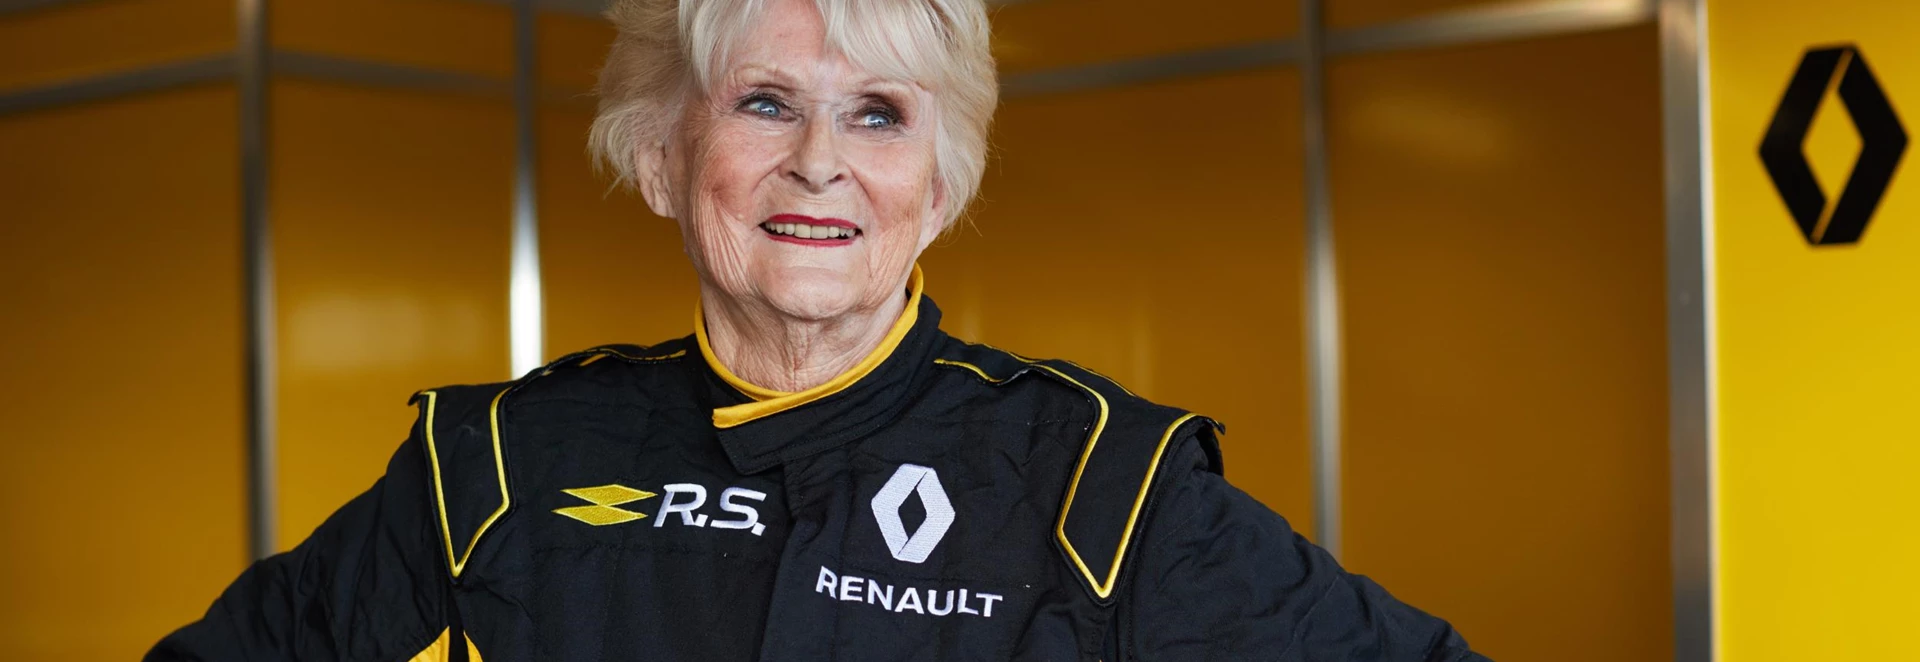 Watch 79-year old Rosemary Smith take a Renault Formula One car for a test drive 